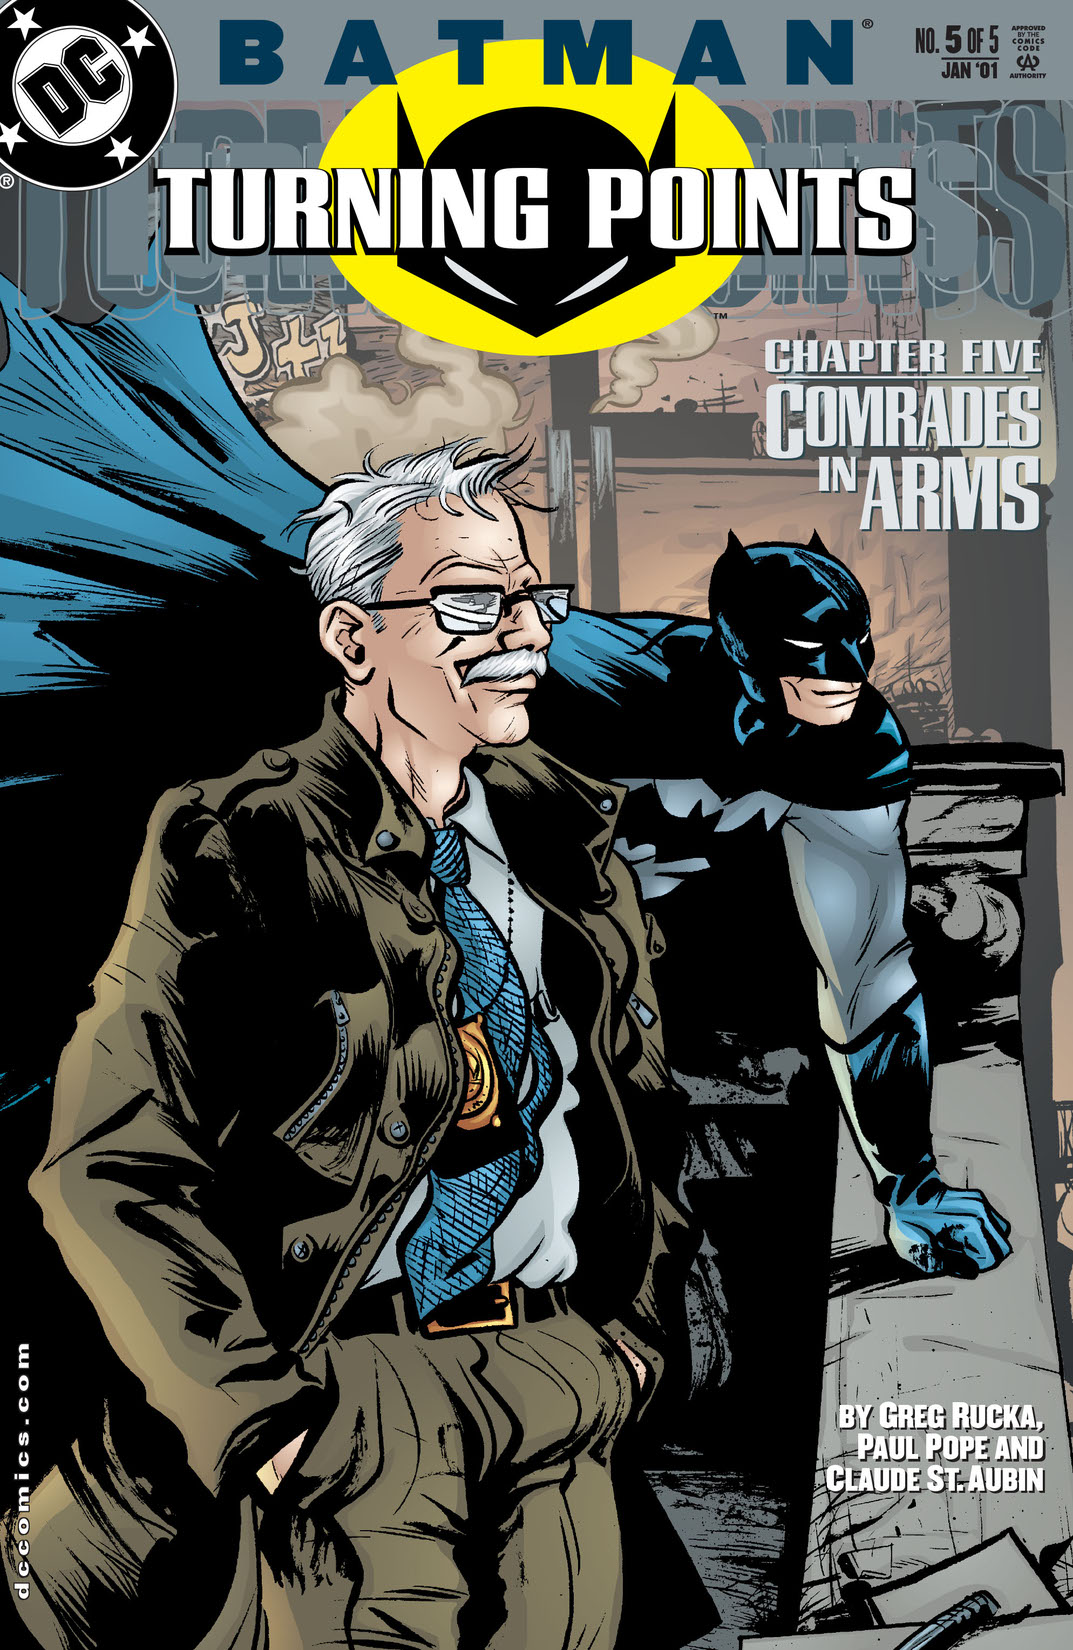 Batman: Turning Points #5 preview images